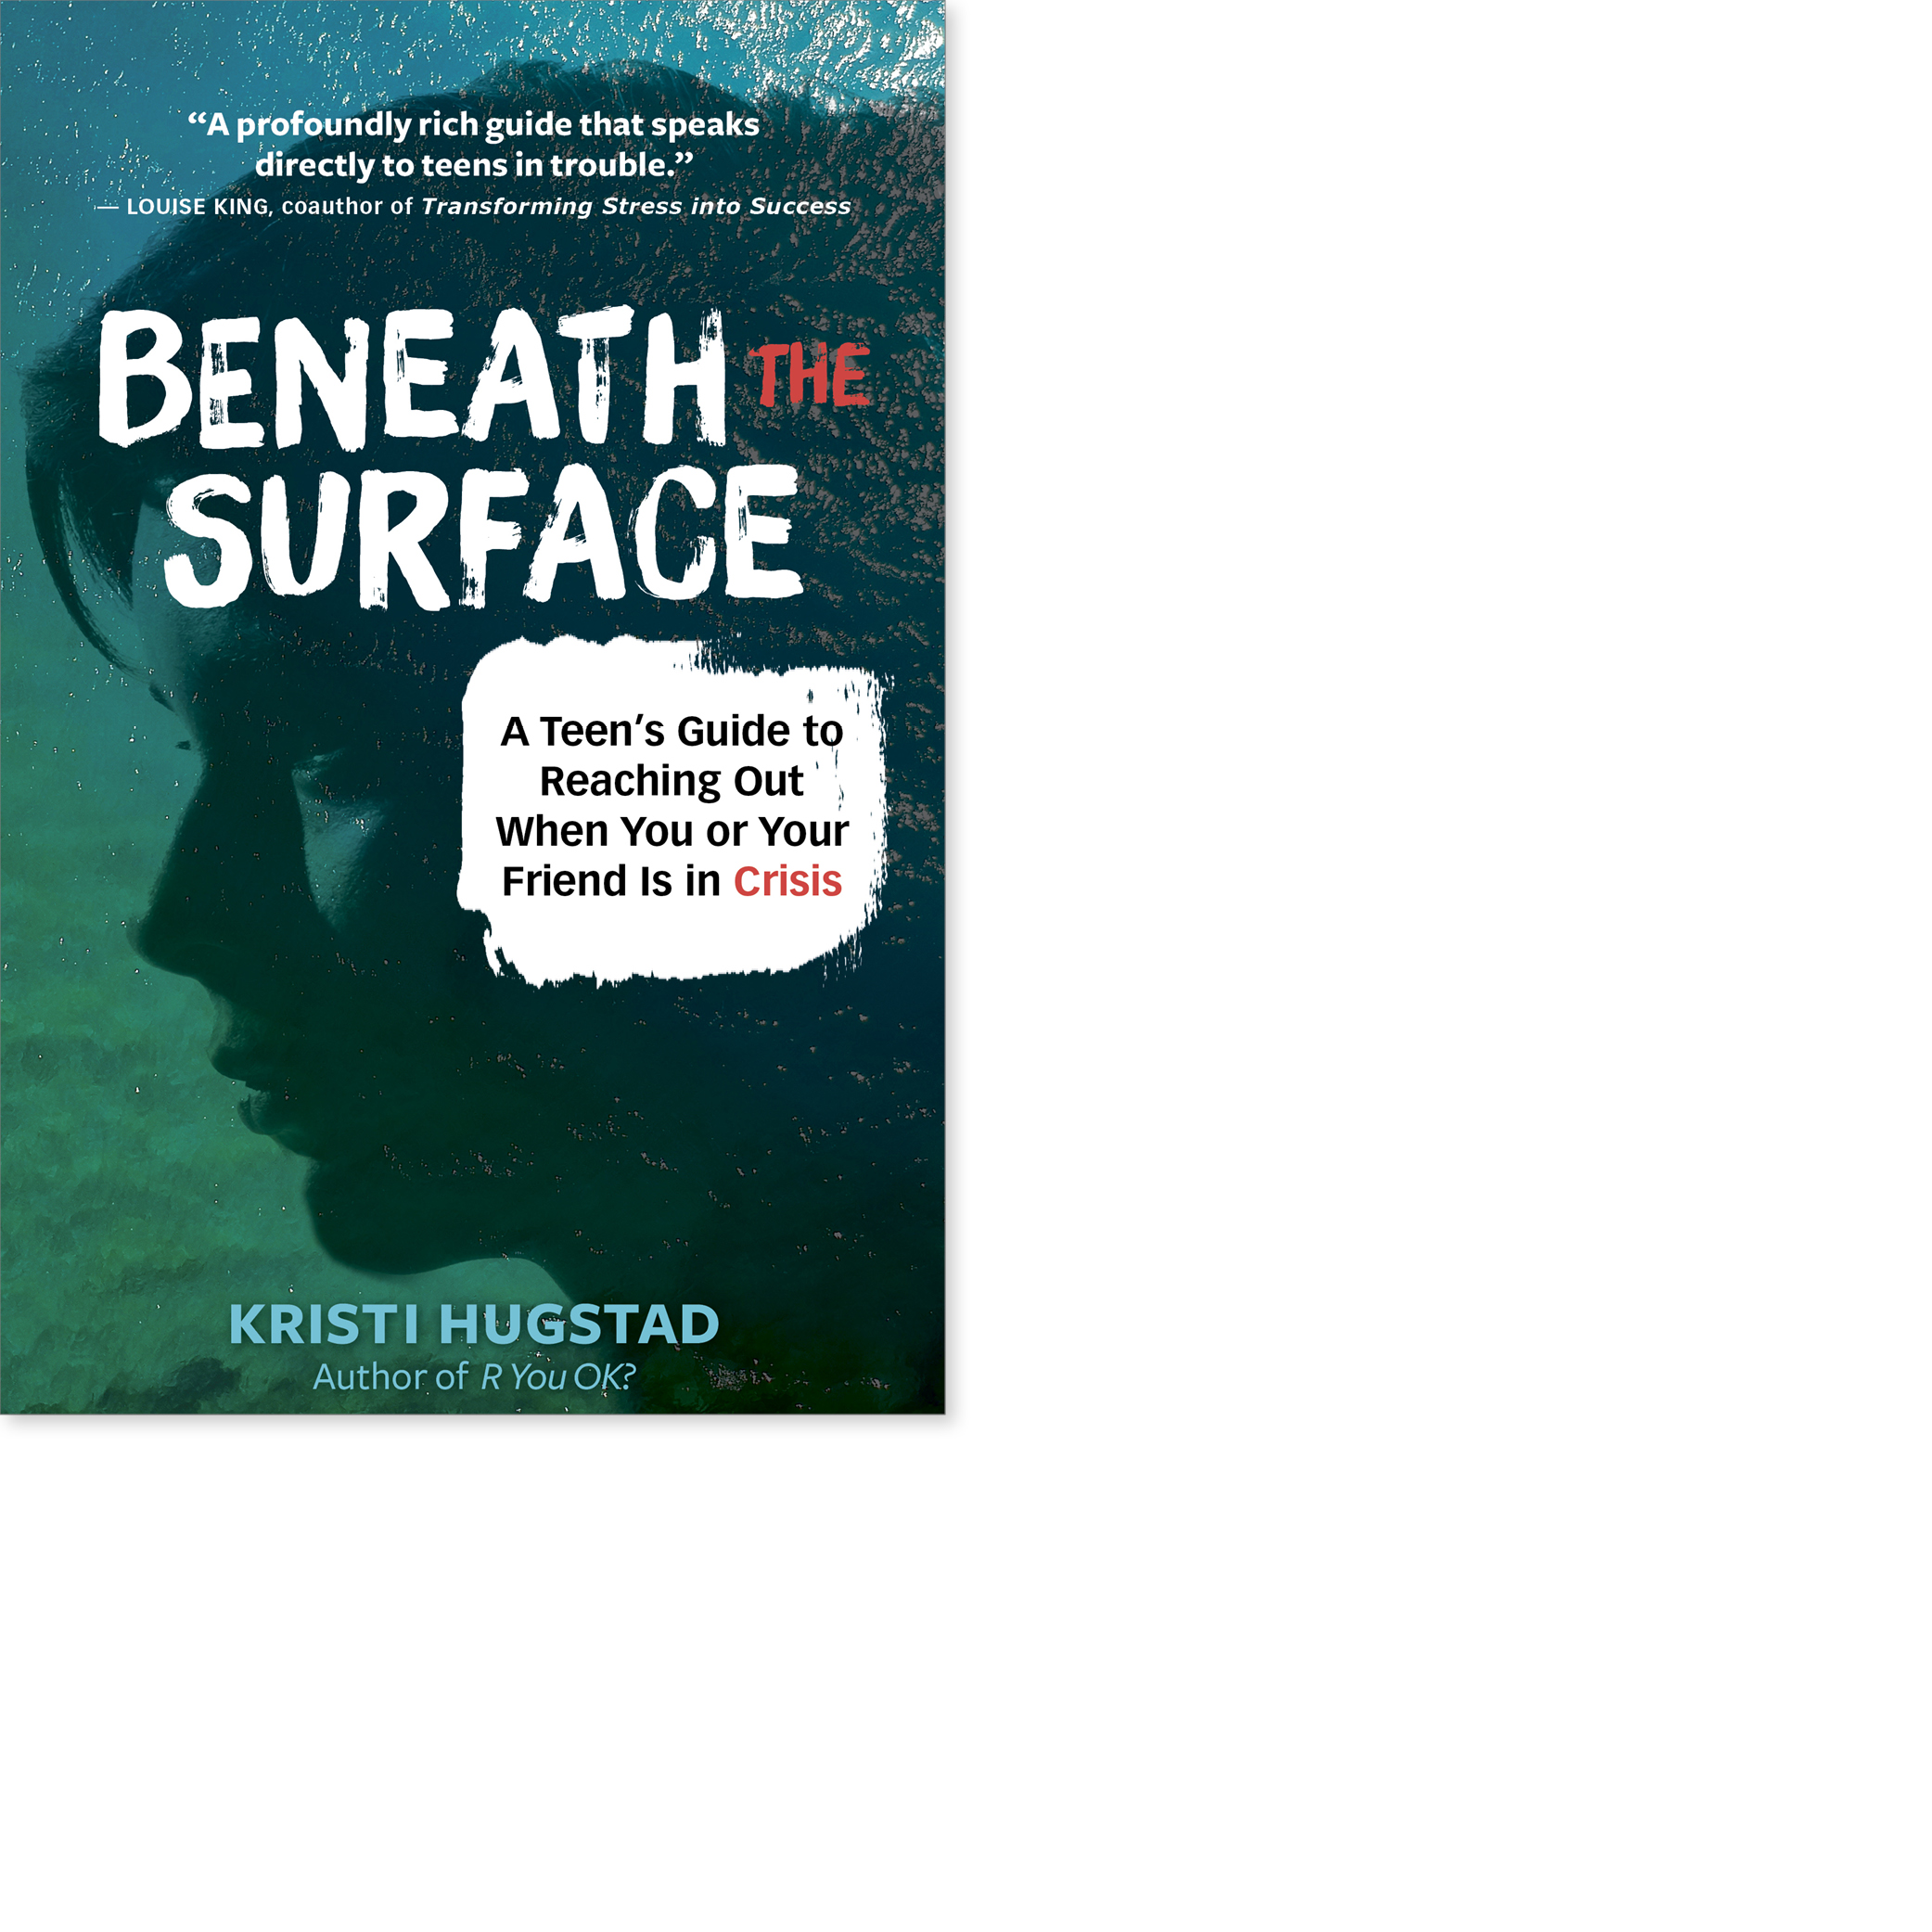 BENEATH THE SURFACE